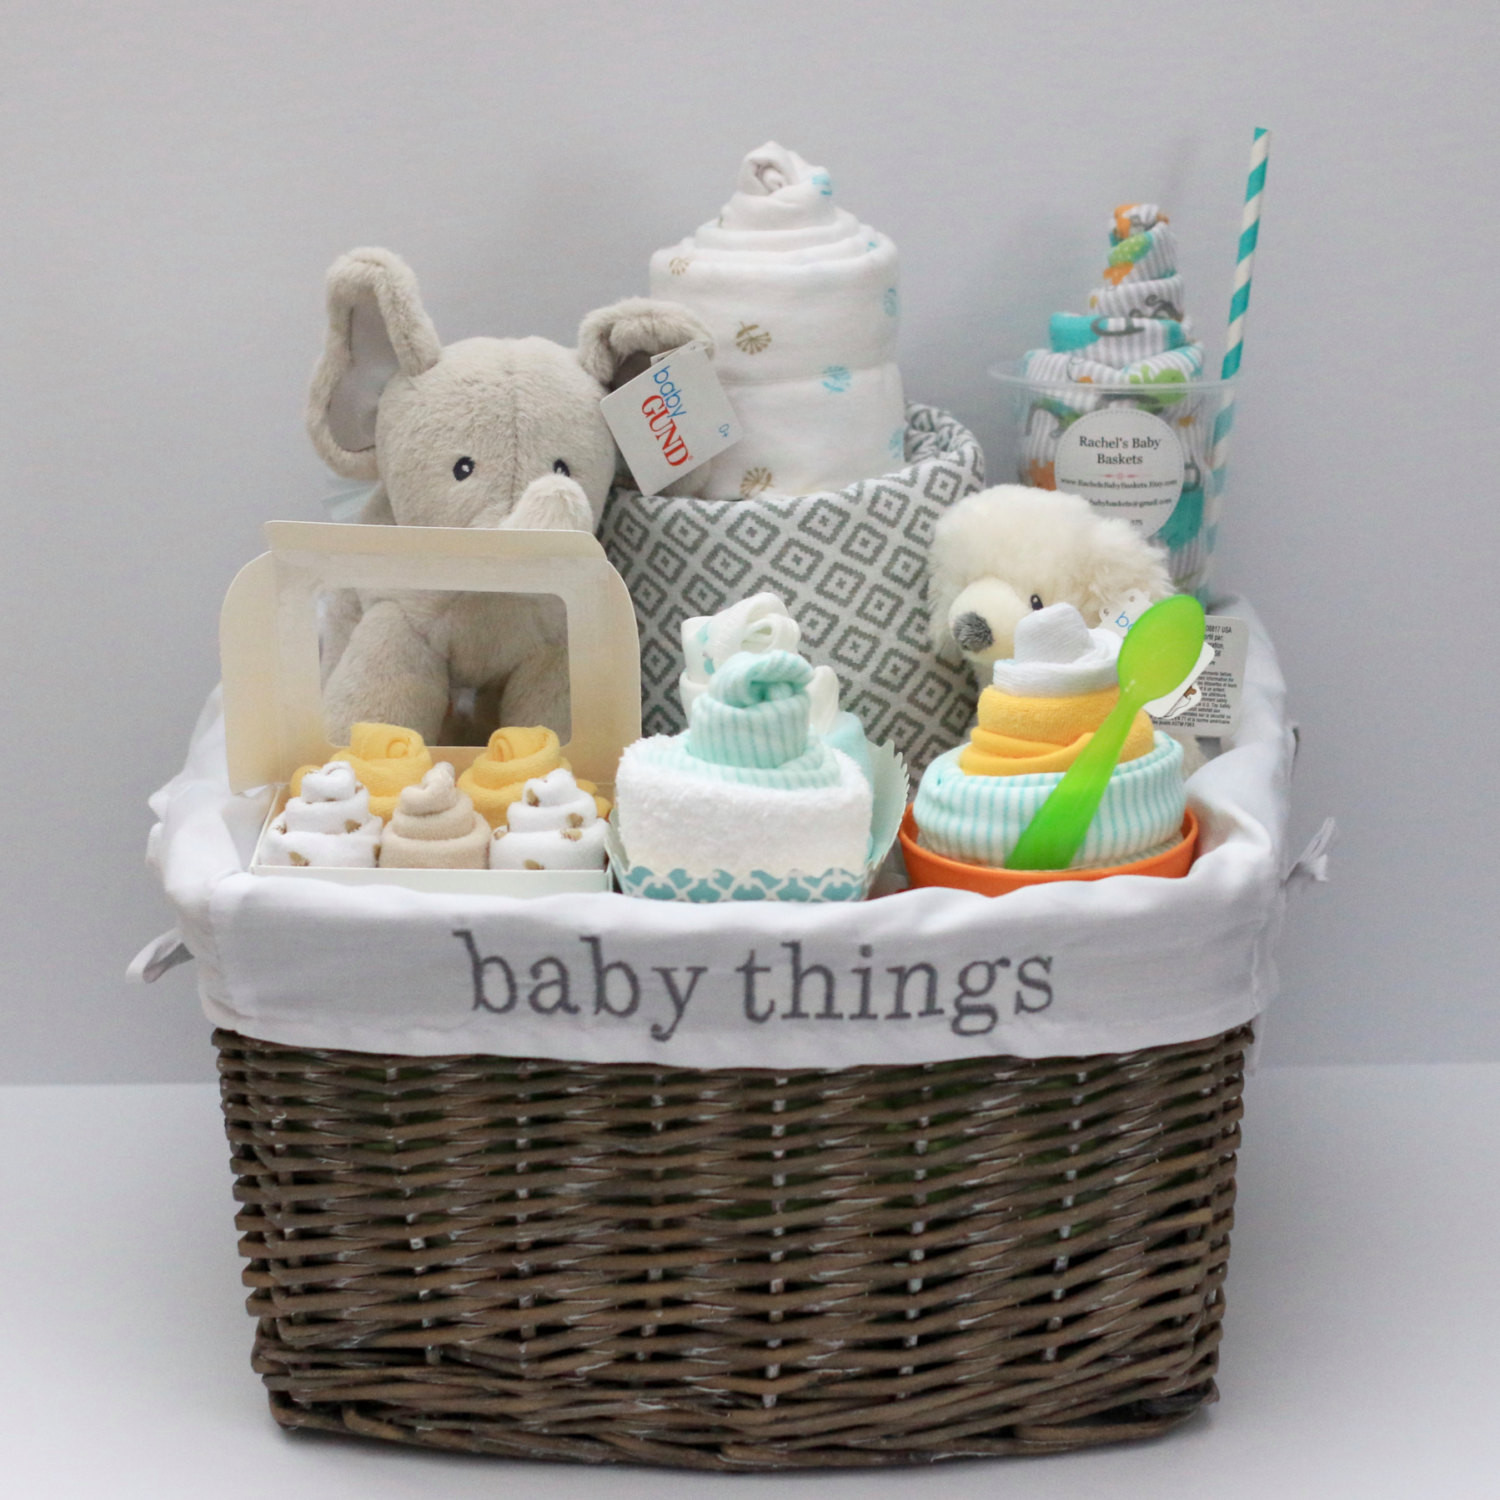 Gift Ideas From Baby
 Gender Neutral Baby Gift Basket Baby Shower Gift Unique Baby